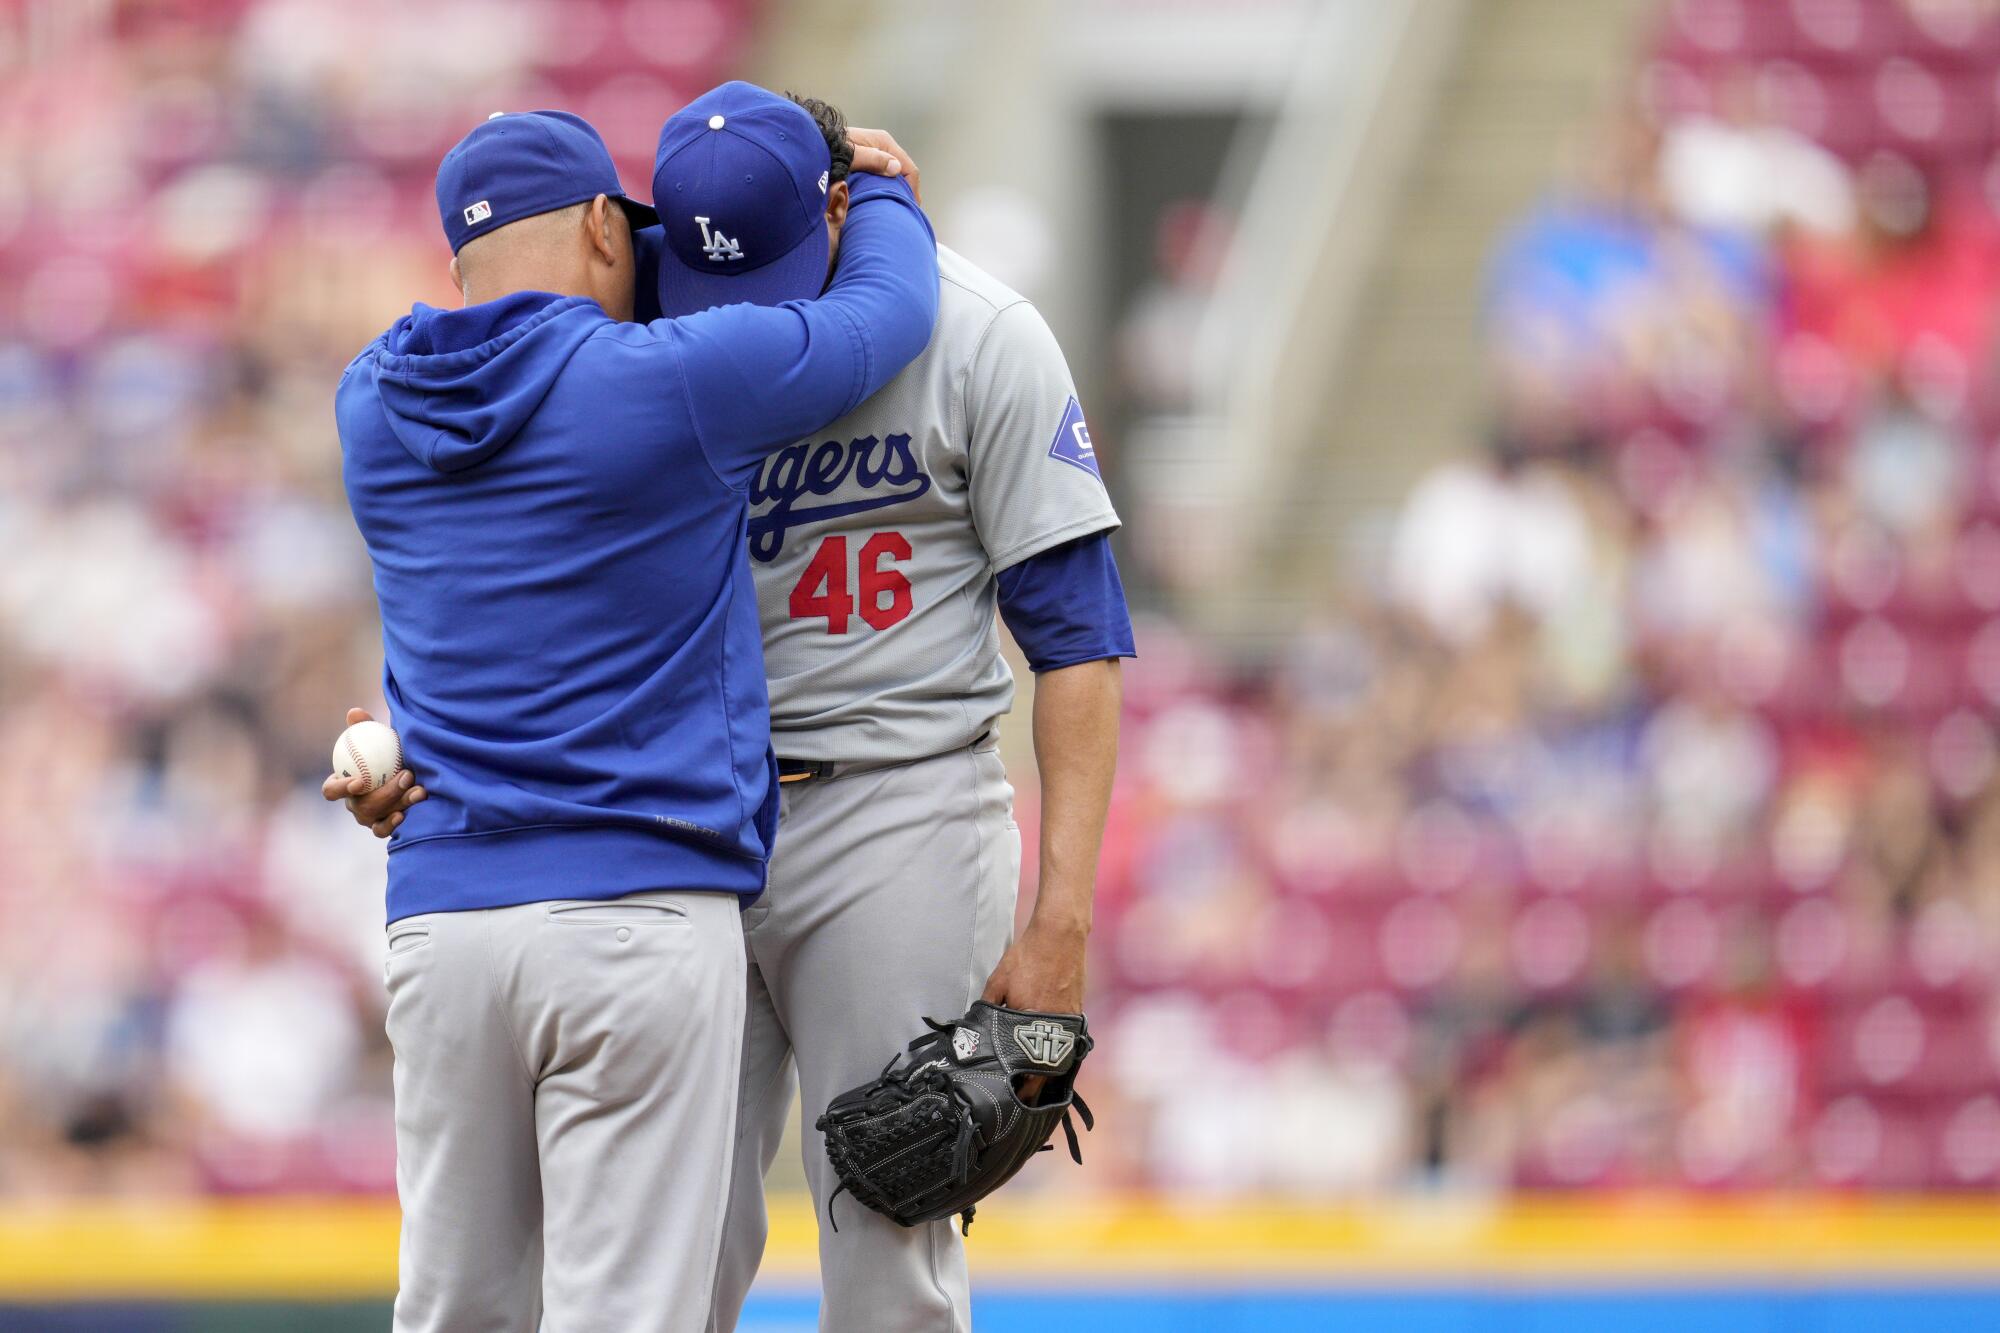 Dodgers pitcher Yohan Ramírez is embraced by manager Dave Roberts, left, during a game on May 26.